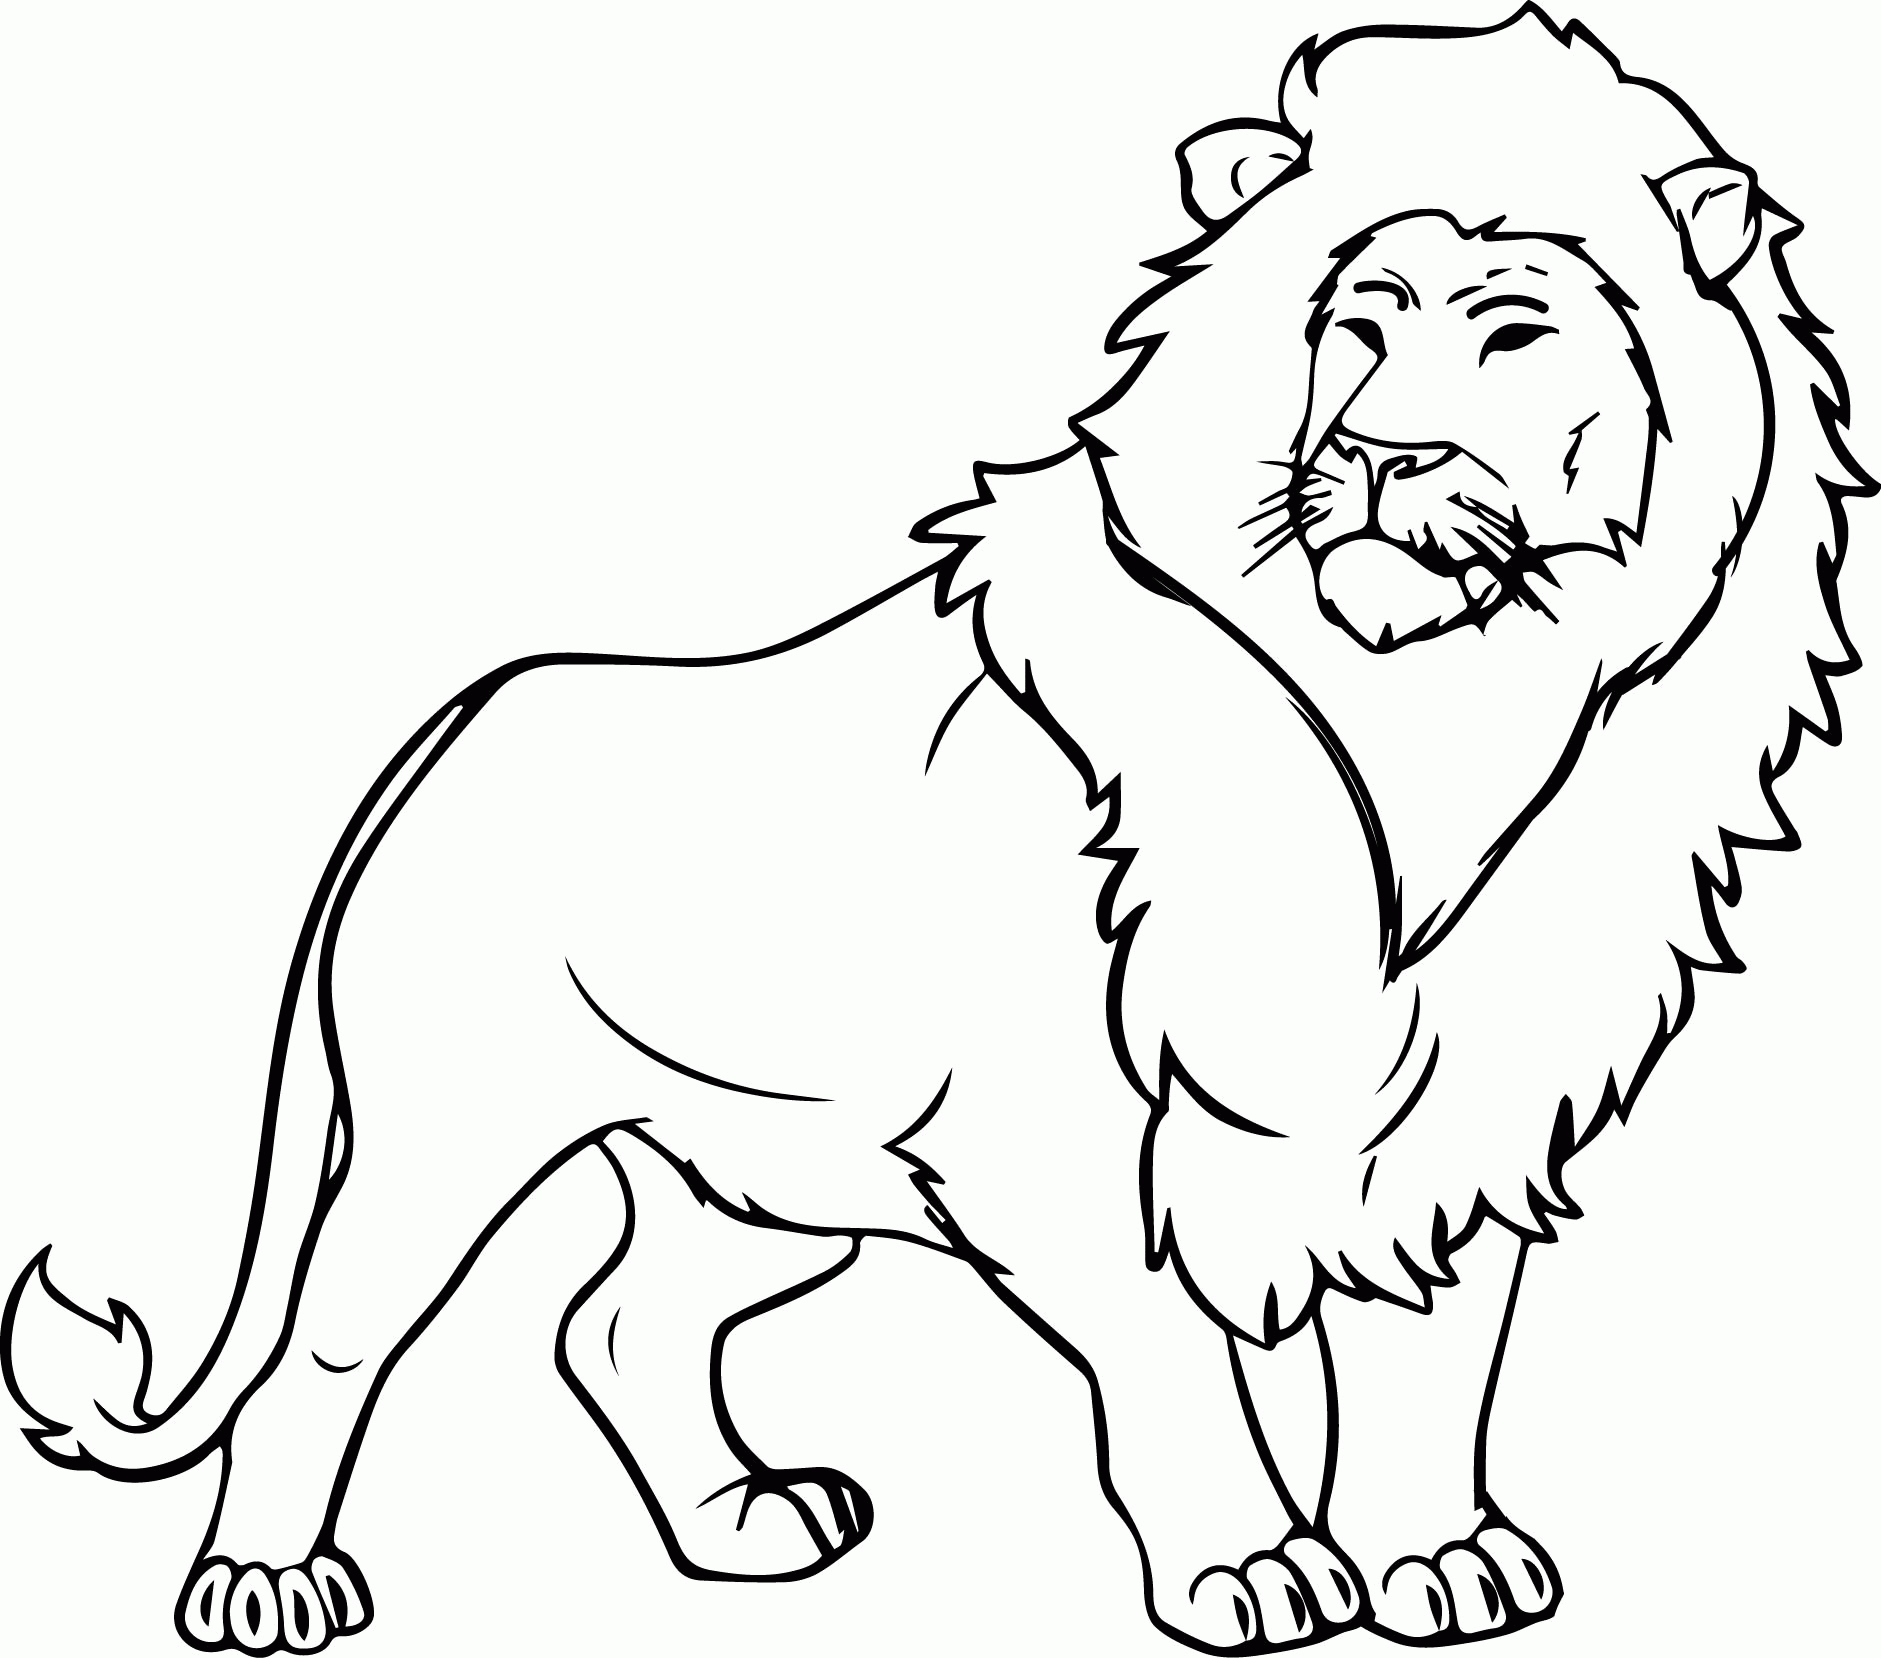 Animal Coloring Page Lion - Zoo Animals Coloring Pages - Best Coloring